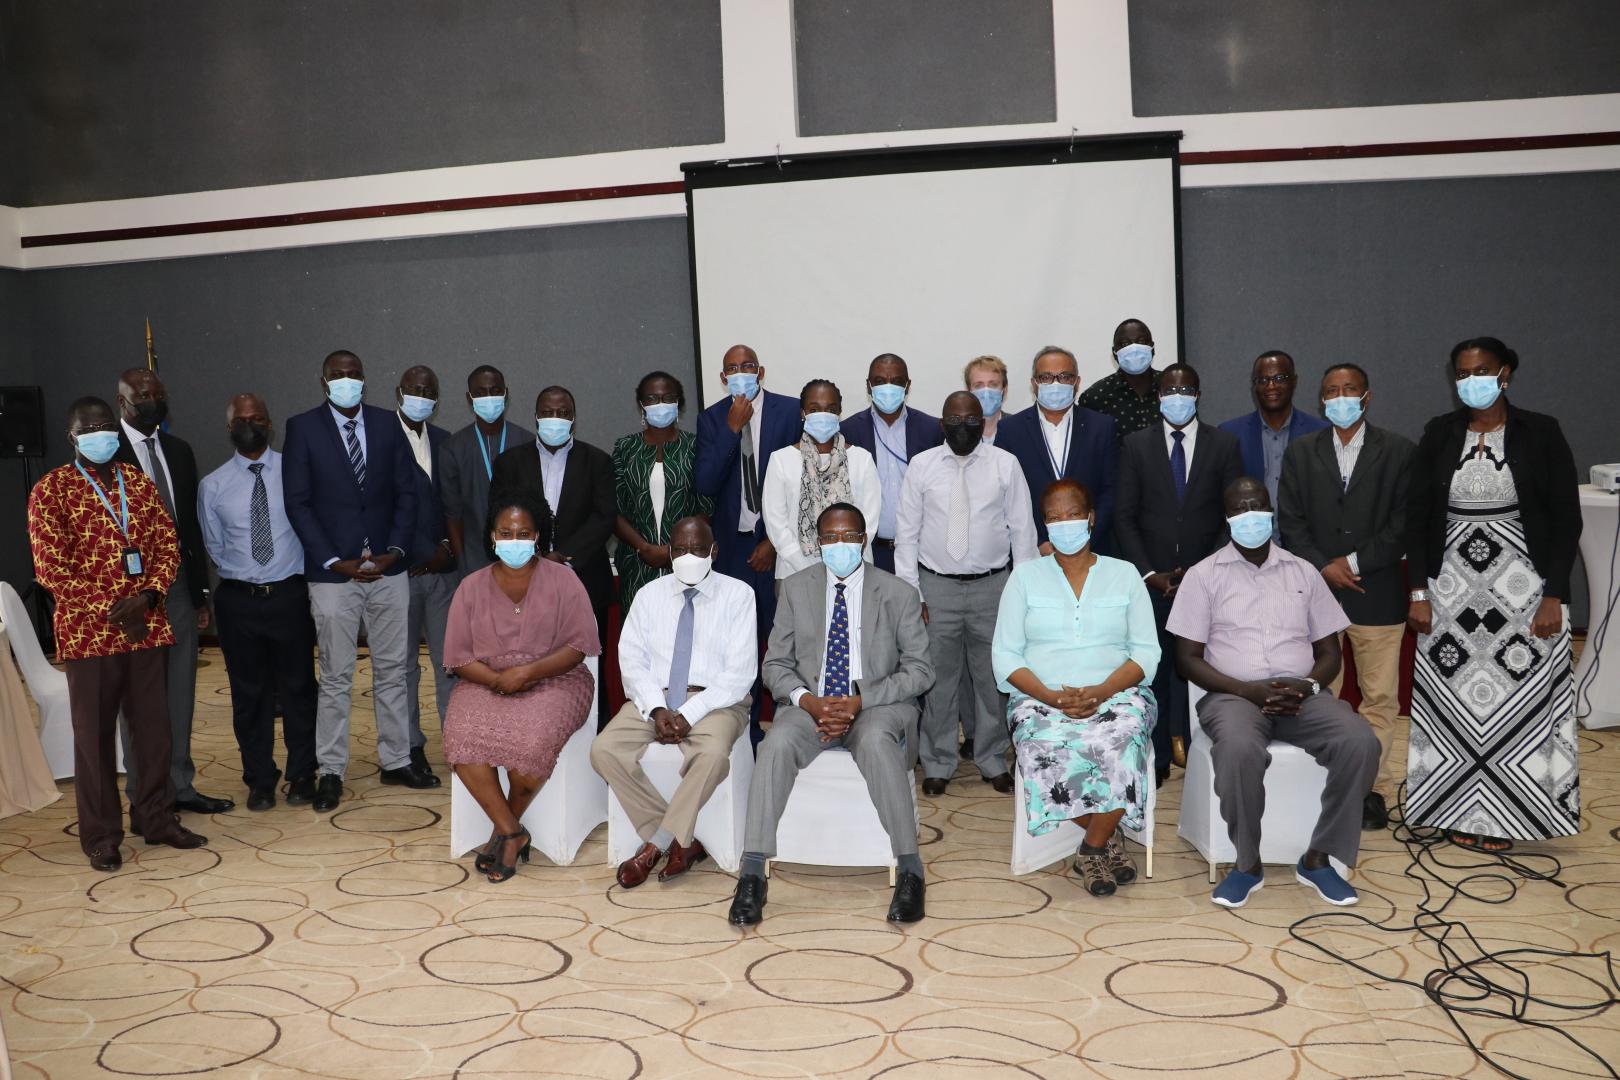 Dr Paul Samson Baba, Acting Undersecretary of the Ministry of Health and Dr Fabian Ndenzako, the WHO Representative a.i. for South Sudan joined by Directors General and other top officials from the Ministry of Health and WCO technical staff in a group photo during the 2022-2023 biennium plan meeting in Juba